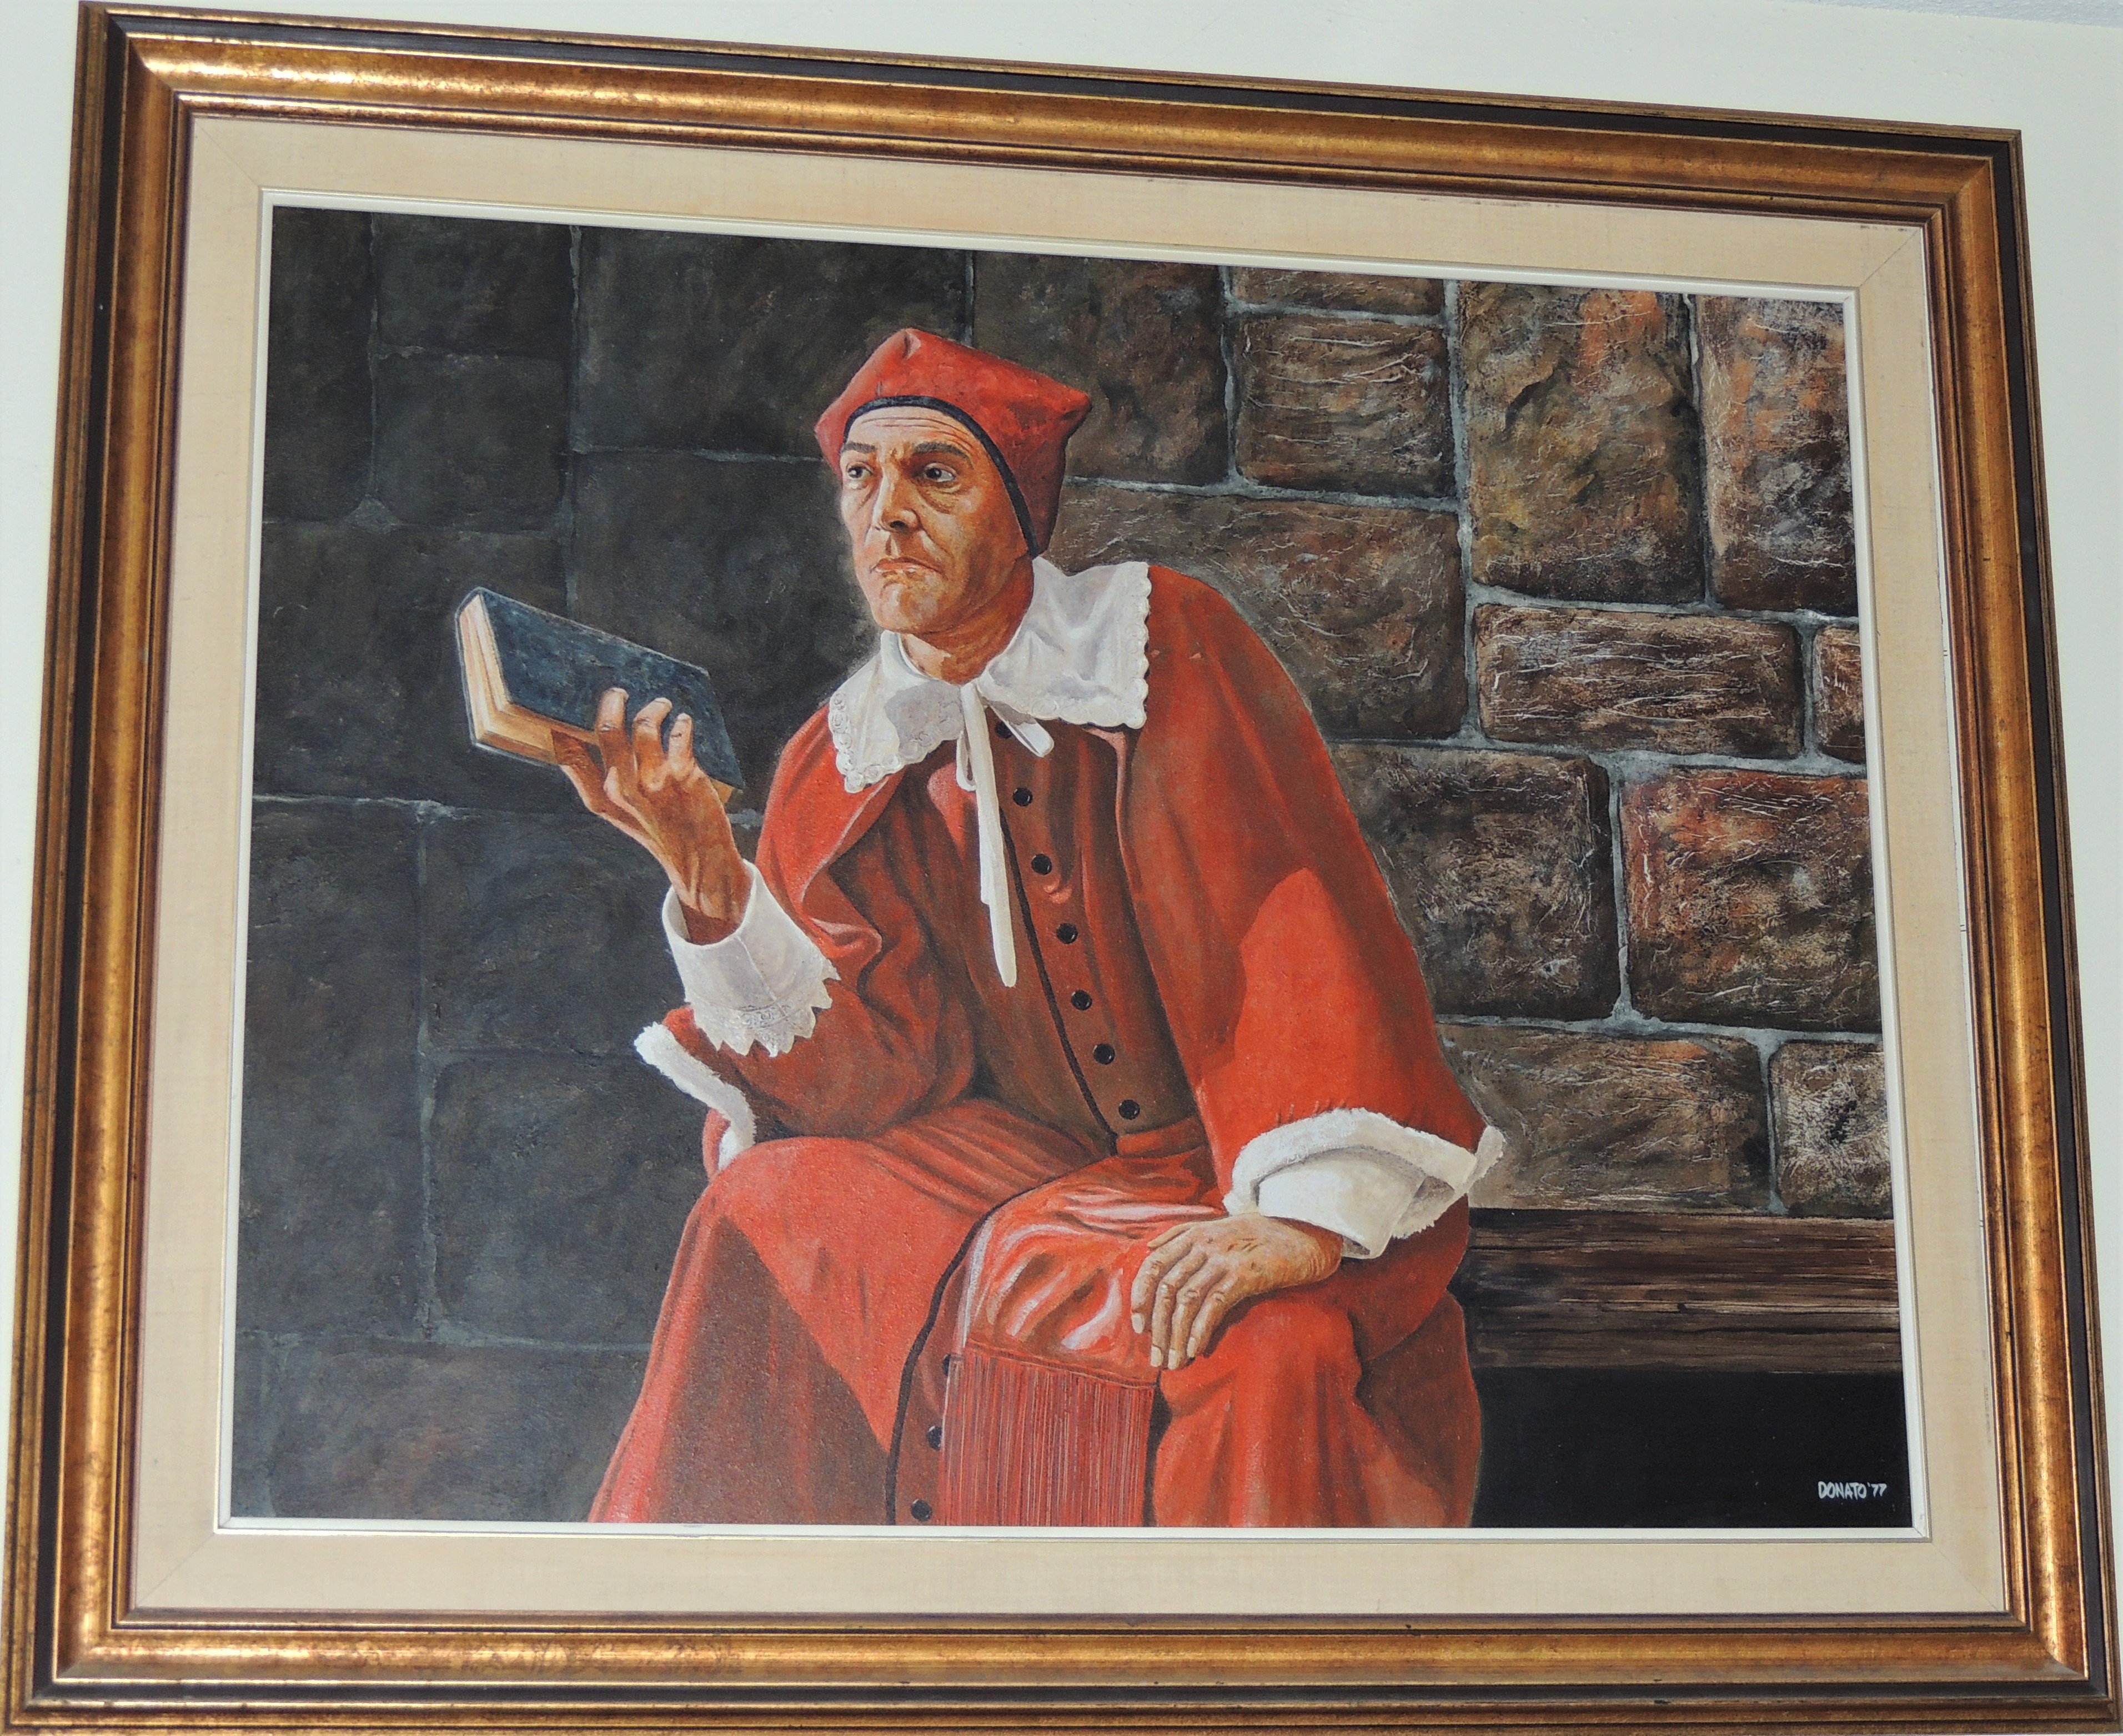 Painting of St John Fisher by Donato